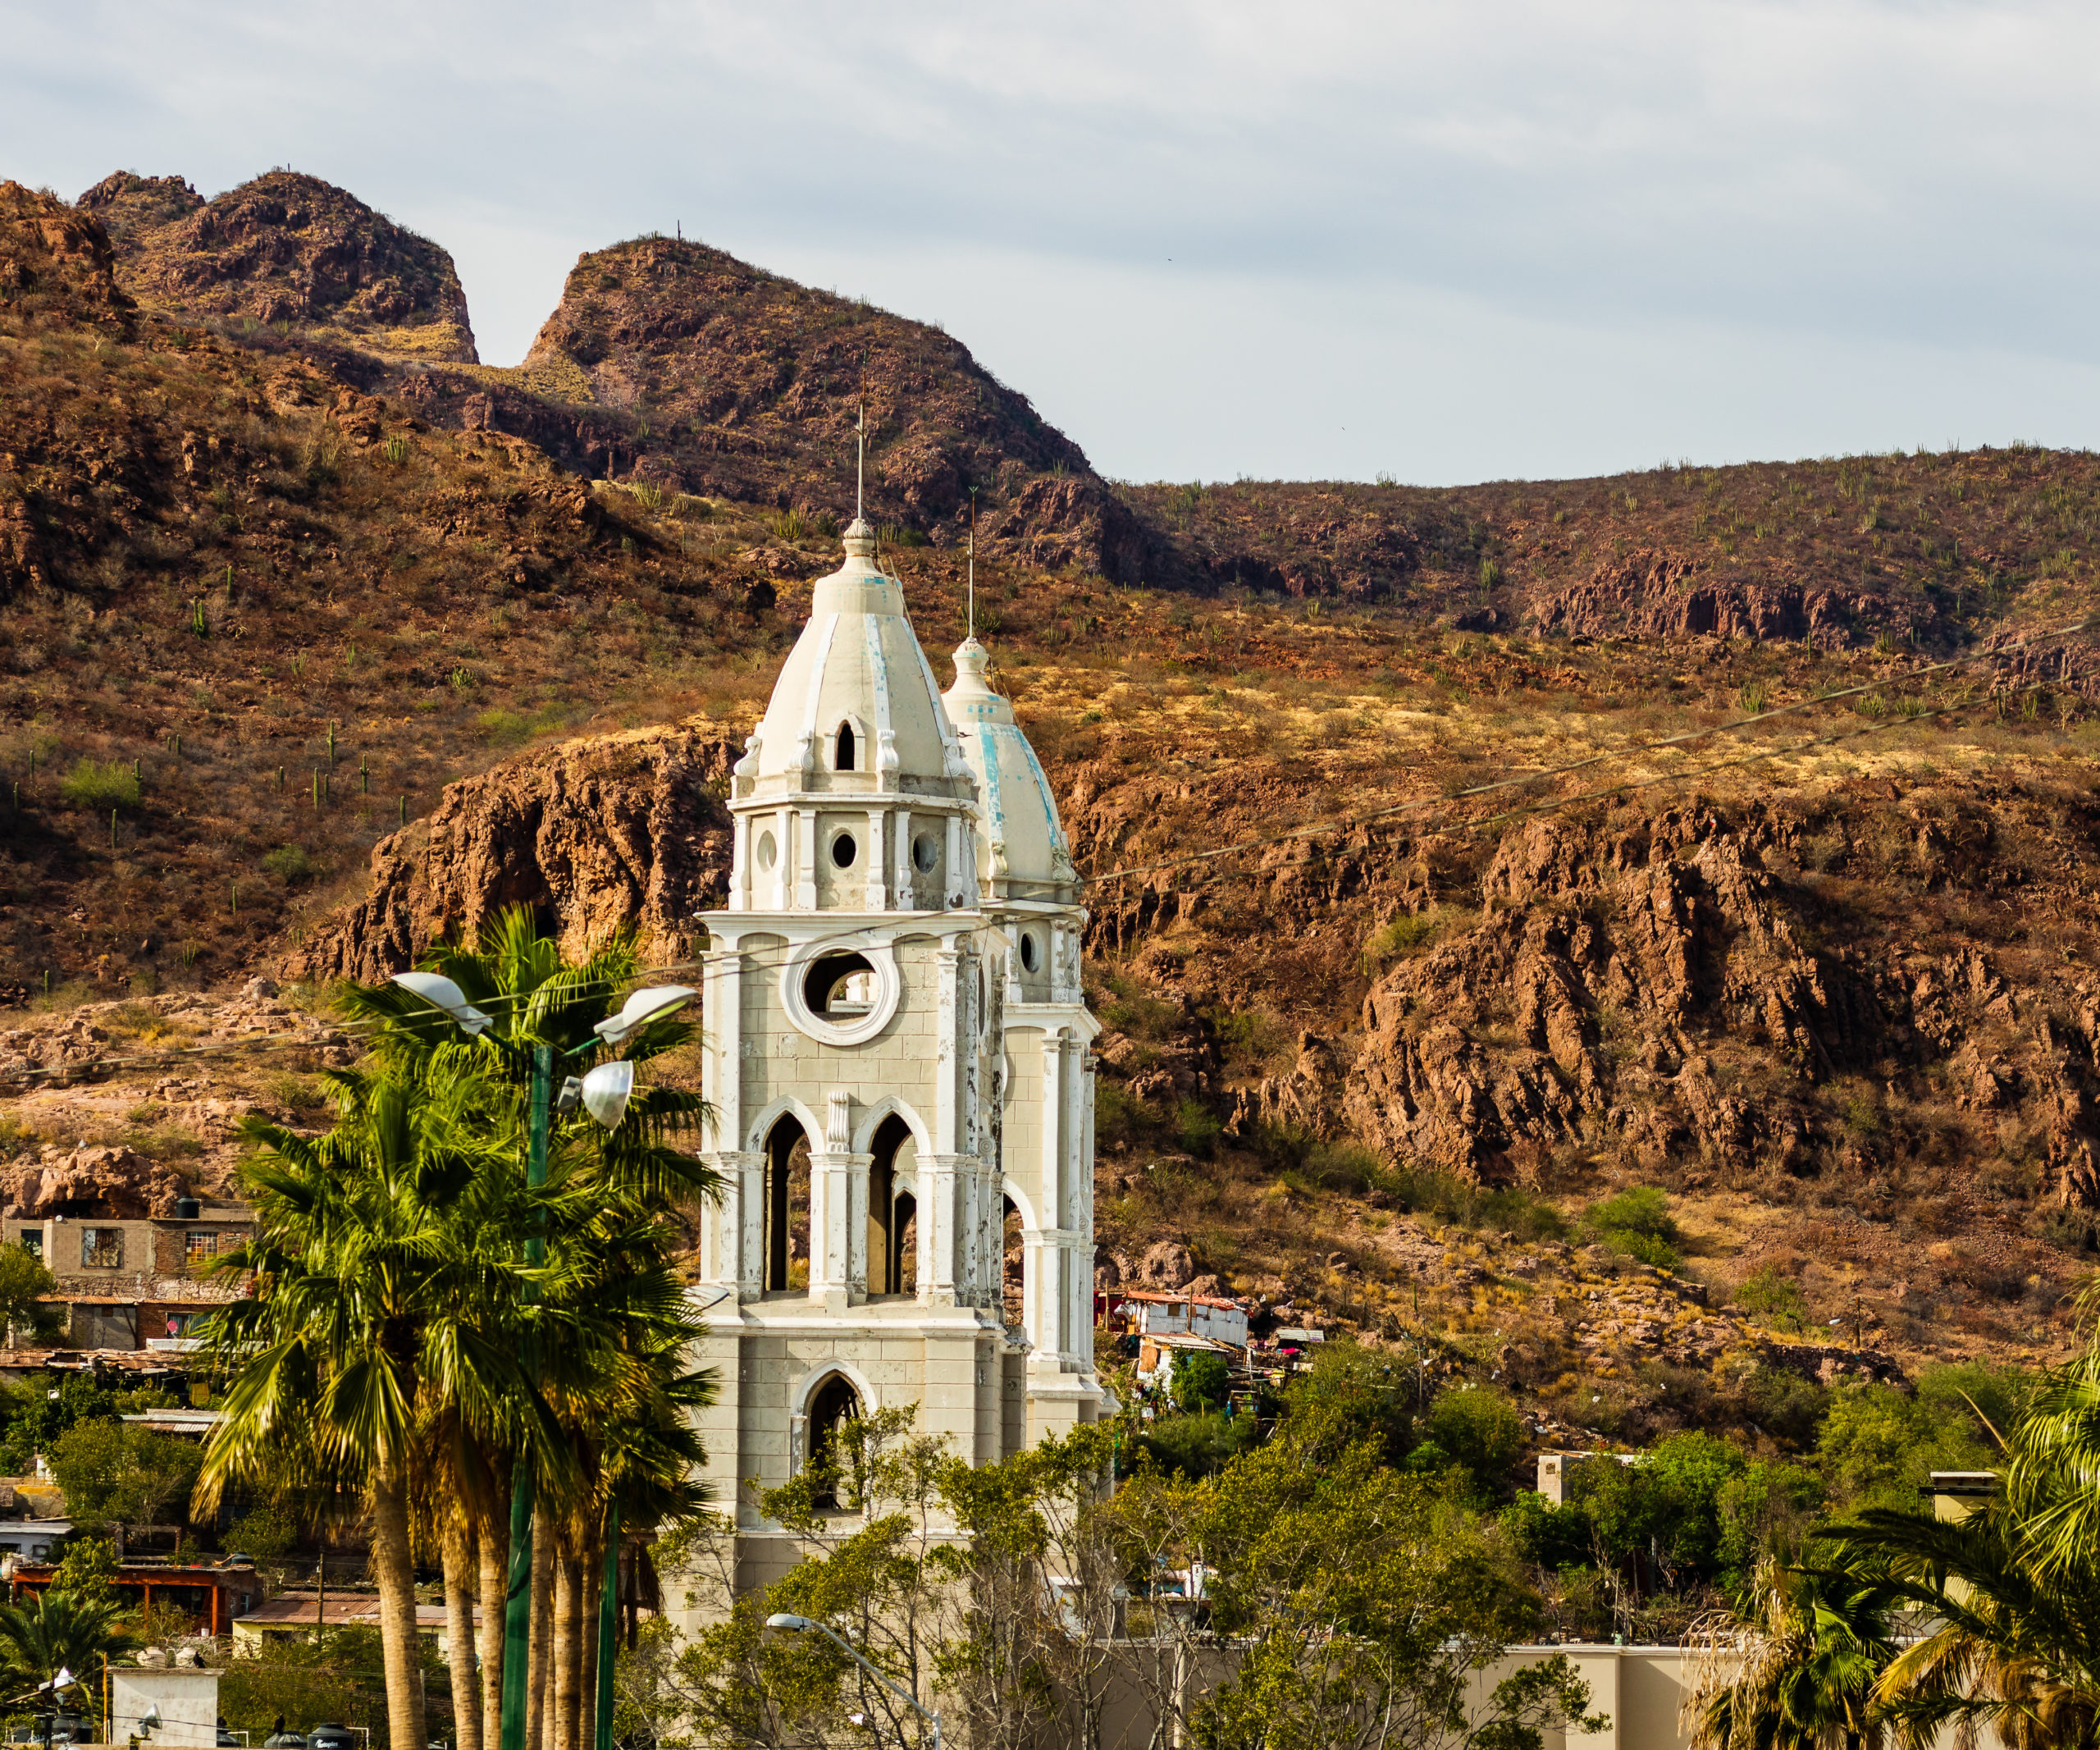 San Fernando Cathedral in Mexico. The cathedral is the oldest in Guaymas city.